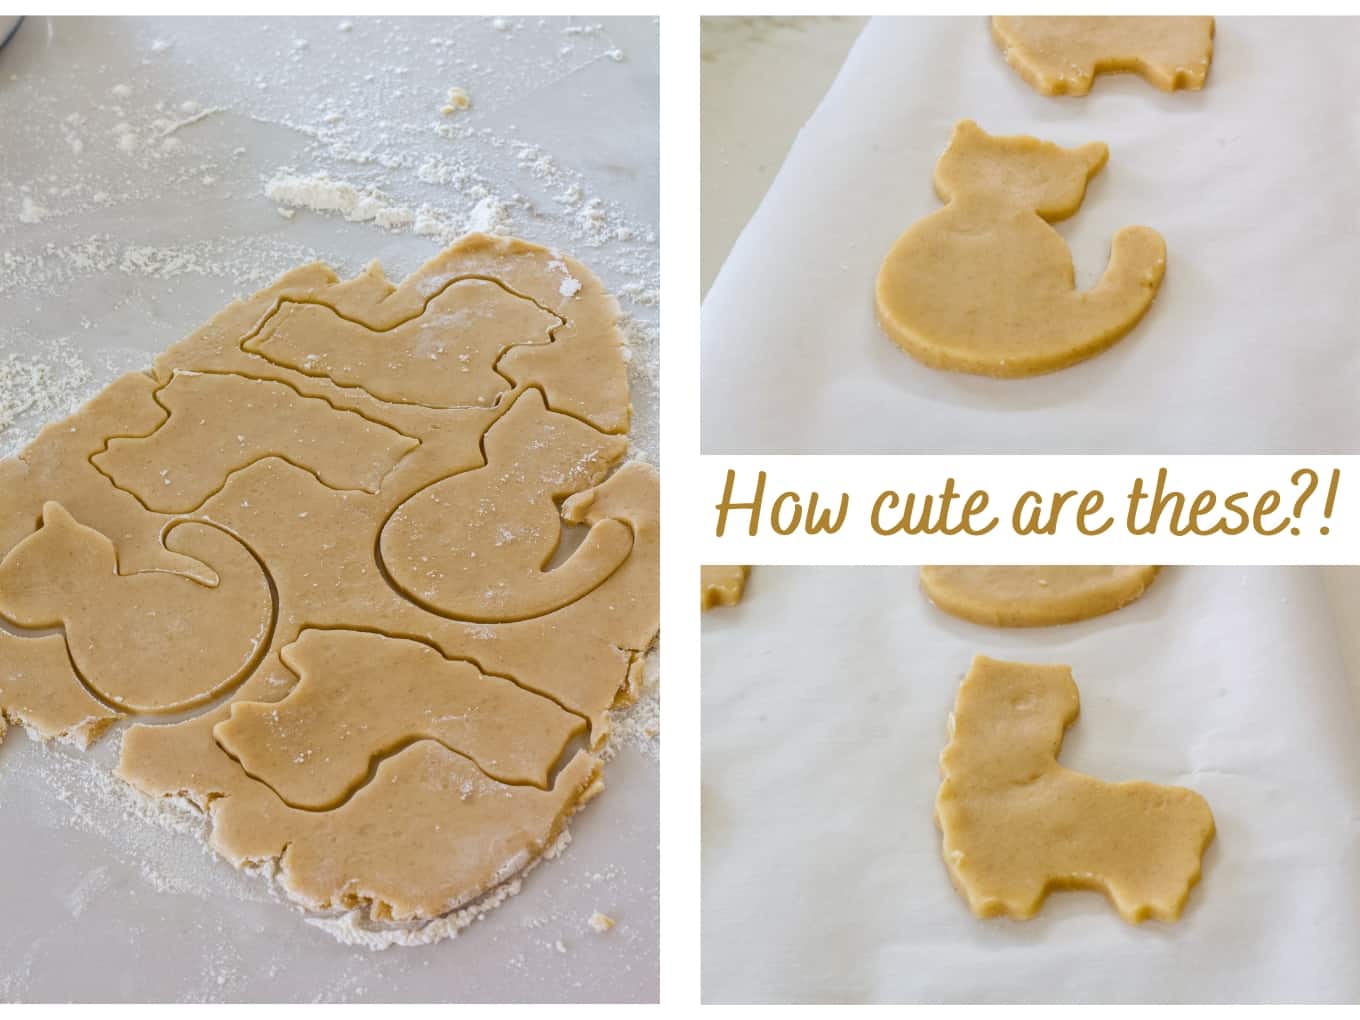 A collage of three images showing the cookie dough being cut out into the cat and llama shapes.